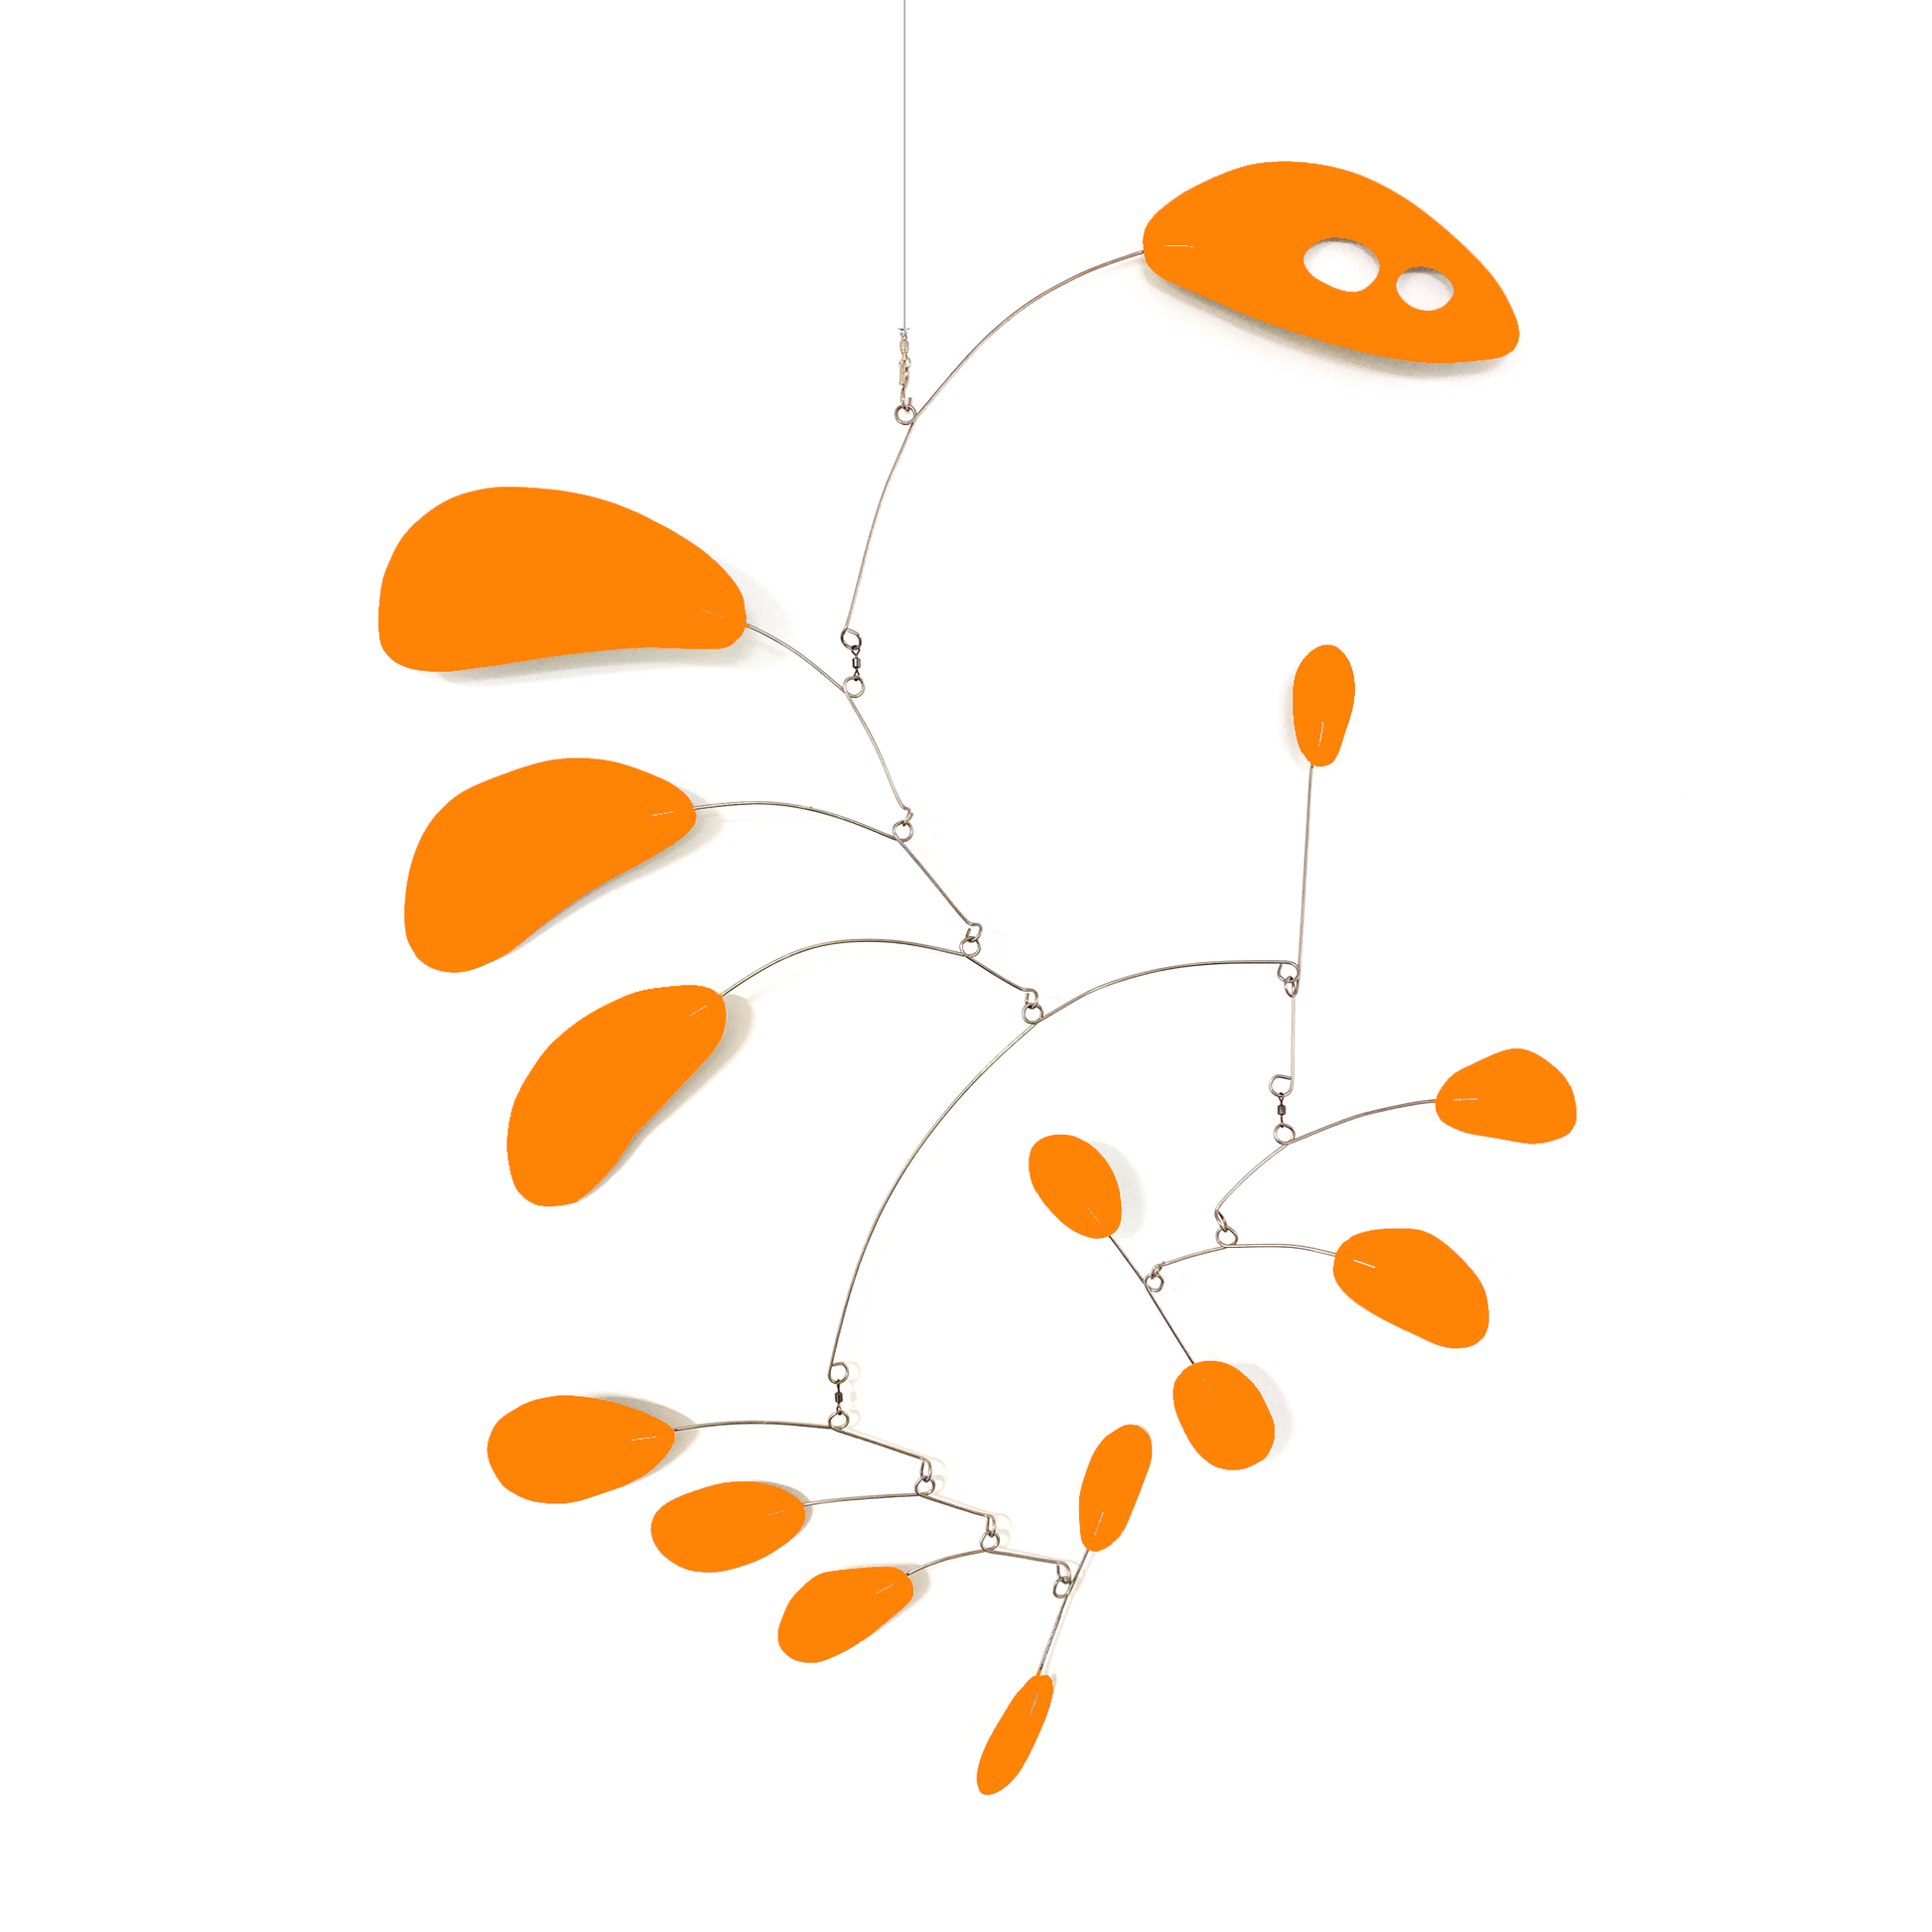 CoolCat mid century modern inspired hanging kinetic art mobile in Palm Springs Orange by AtomicMobiles.com